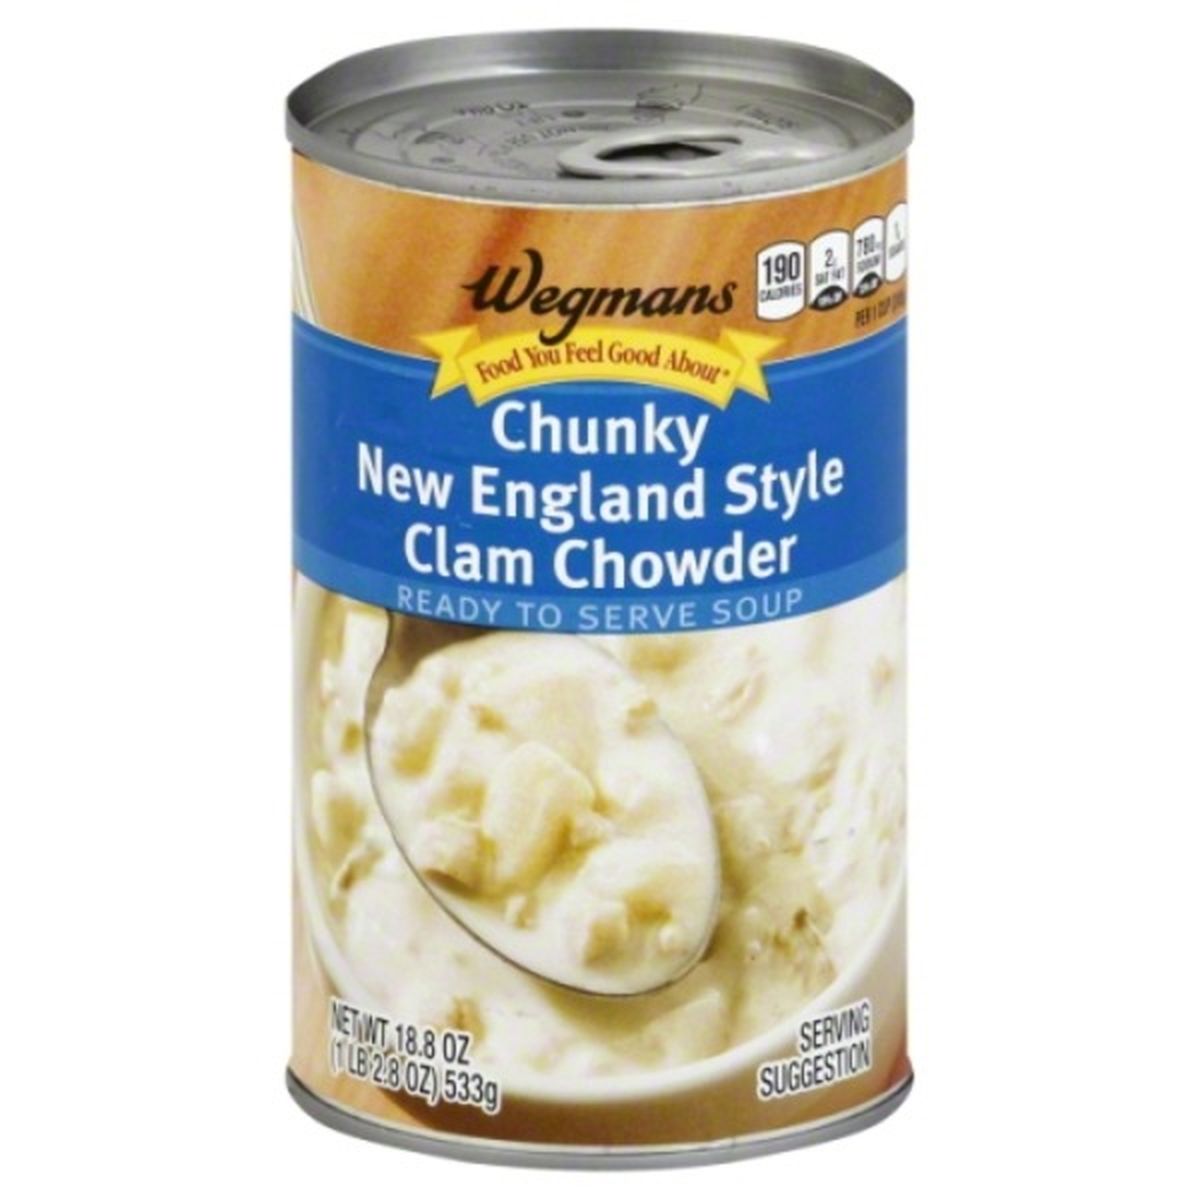 Calories in Wegmans Hearty New England Style Clam Chowder